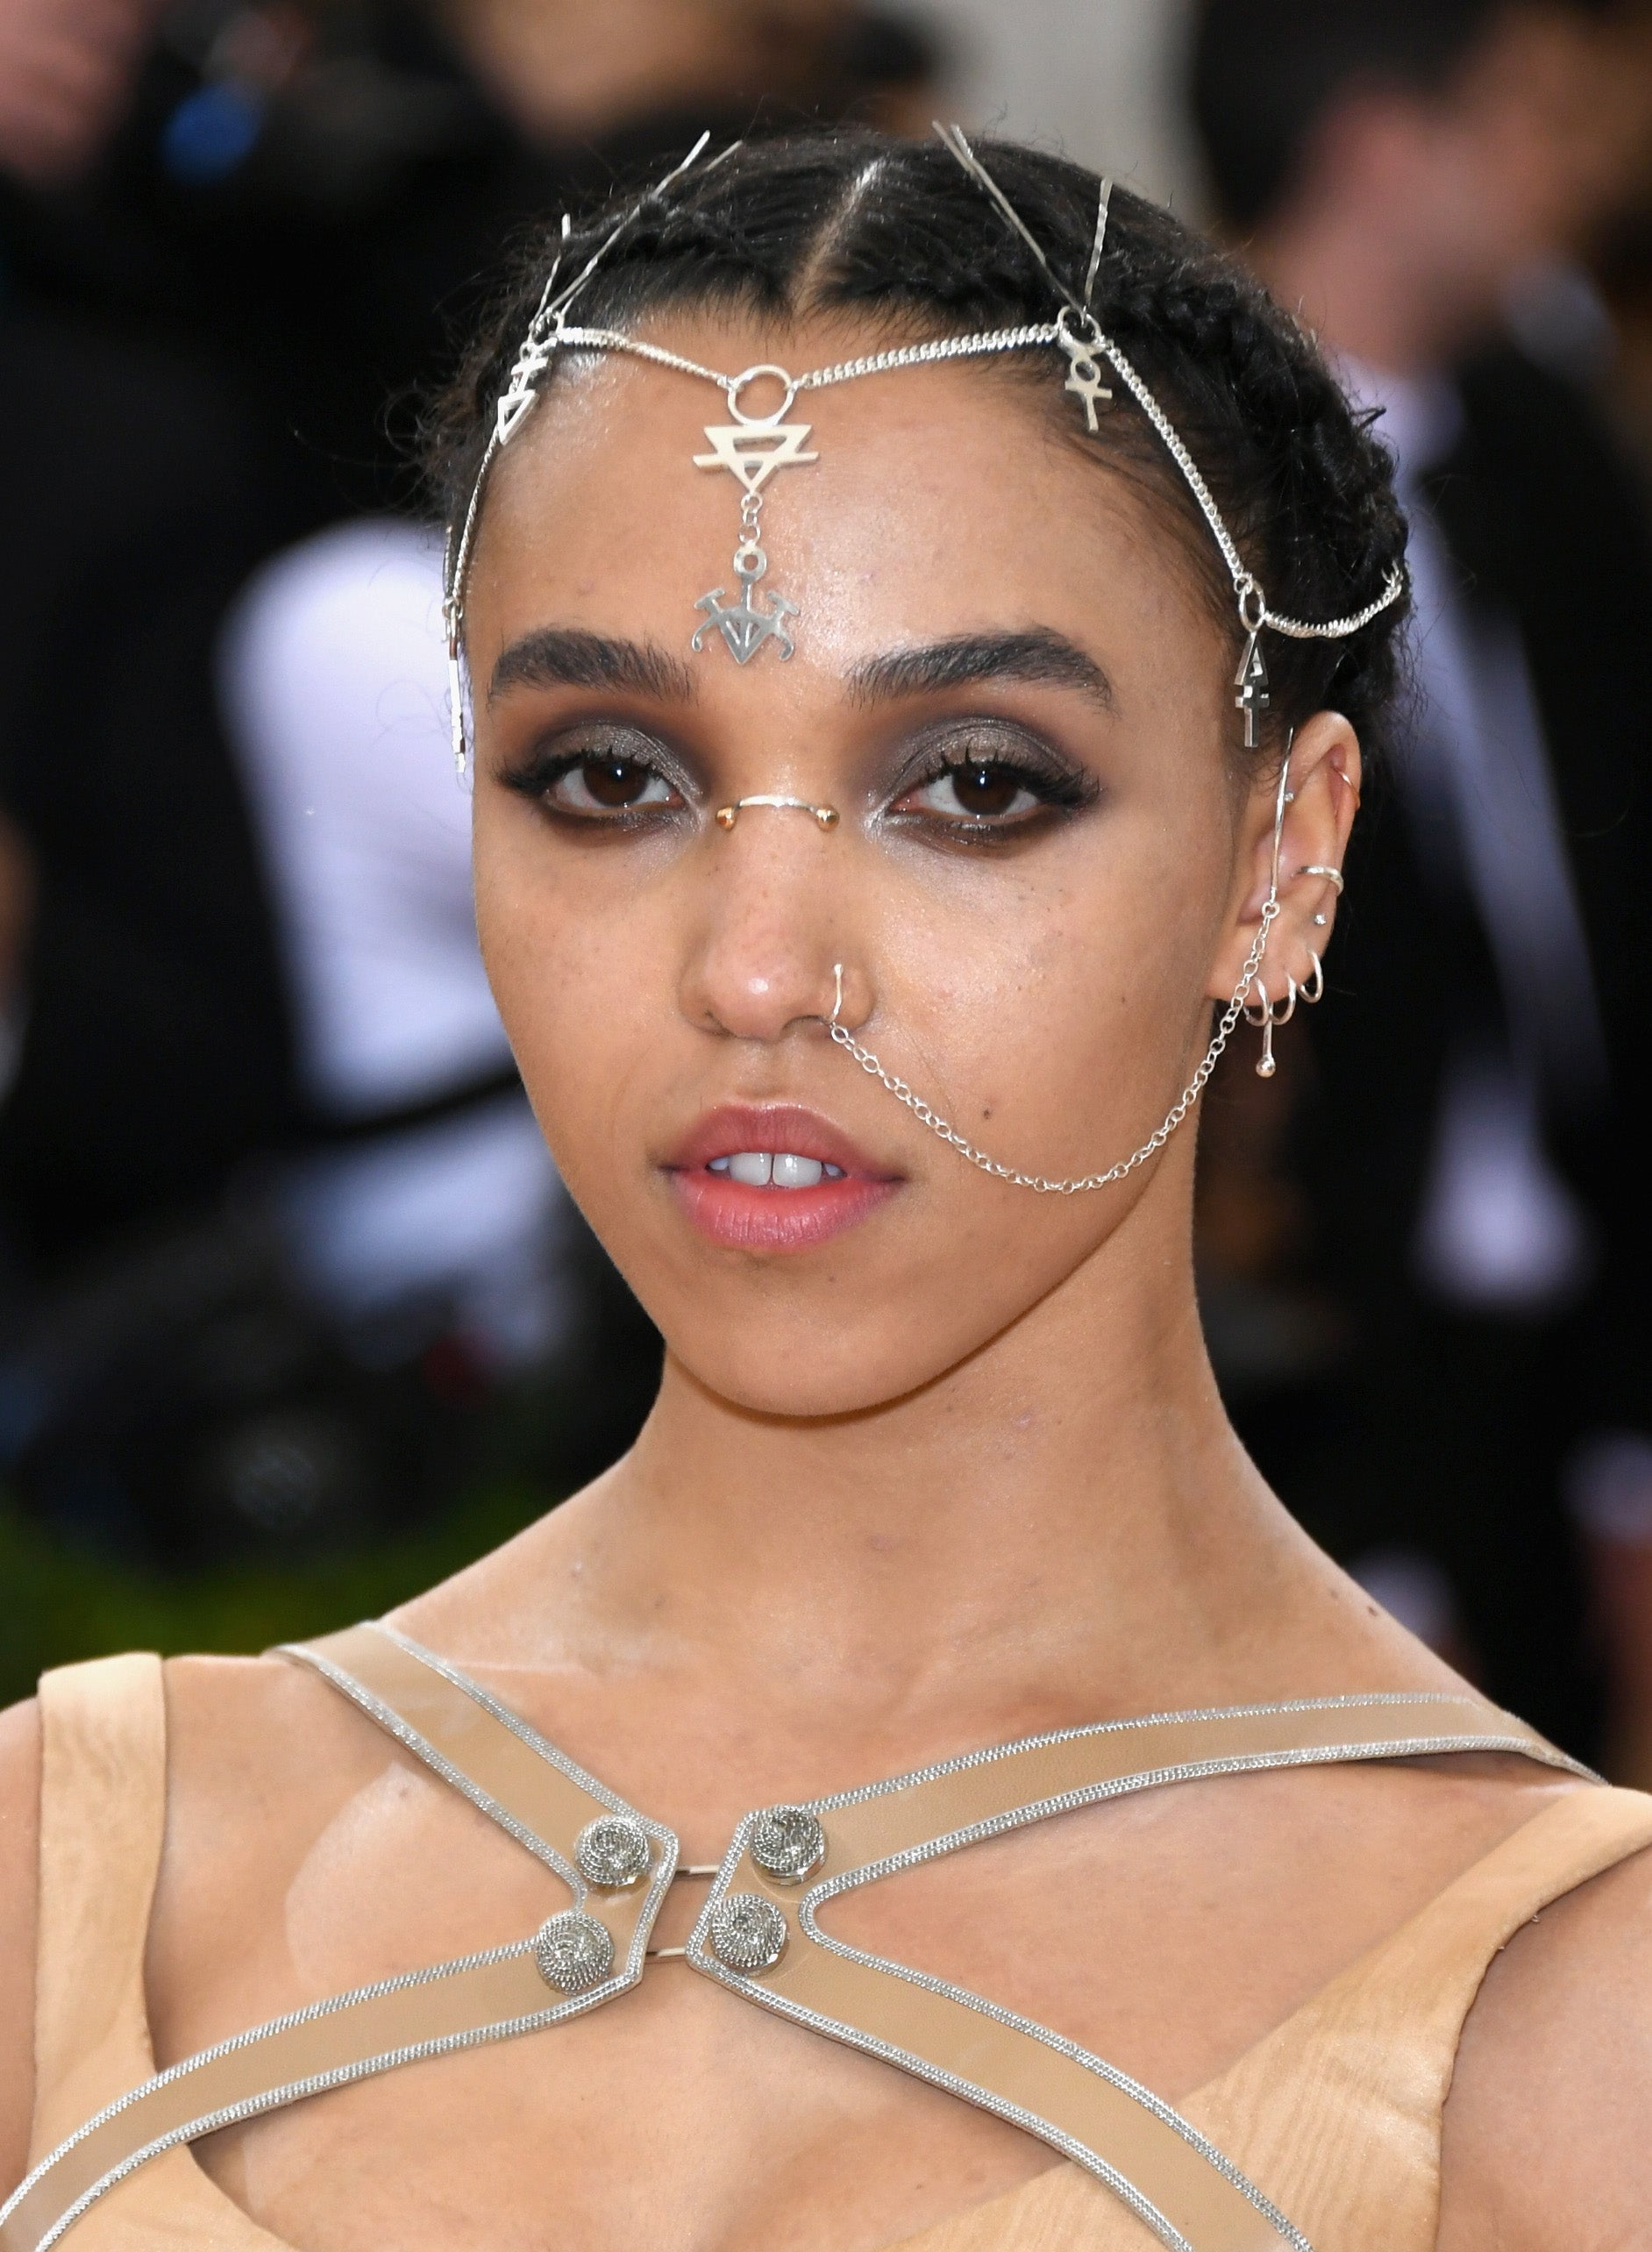 22 Seriously Stunning Hair and Beauty Looks from the Met Gala 2016
